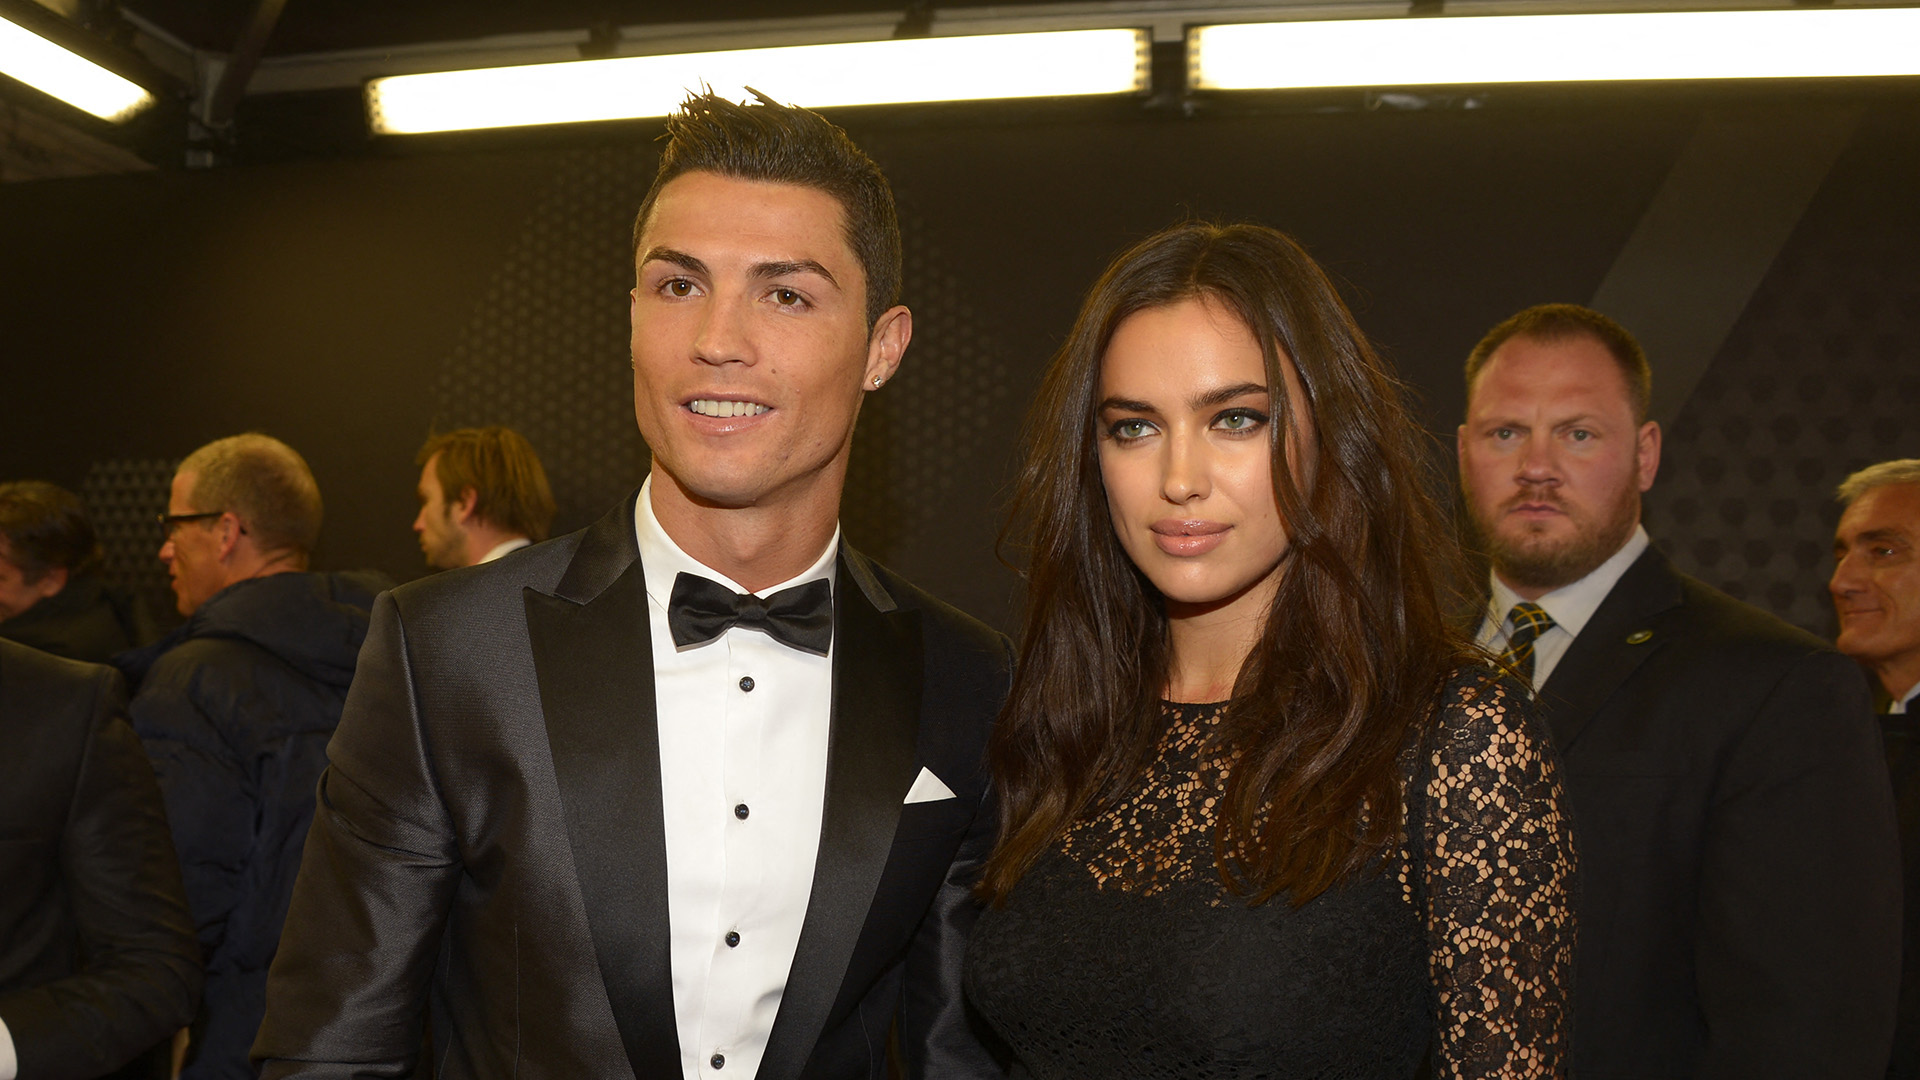 Ladies in Love: Cristiano Ronaldo's Most Talked-About Relationships